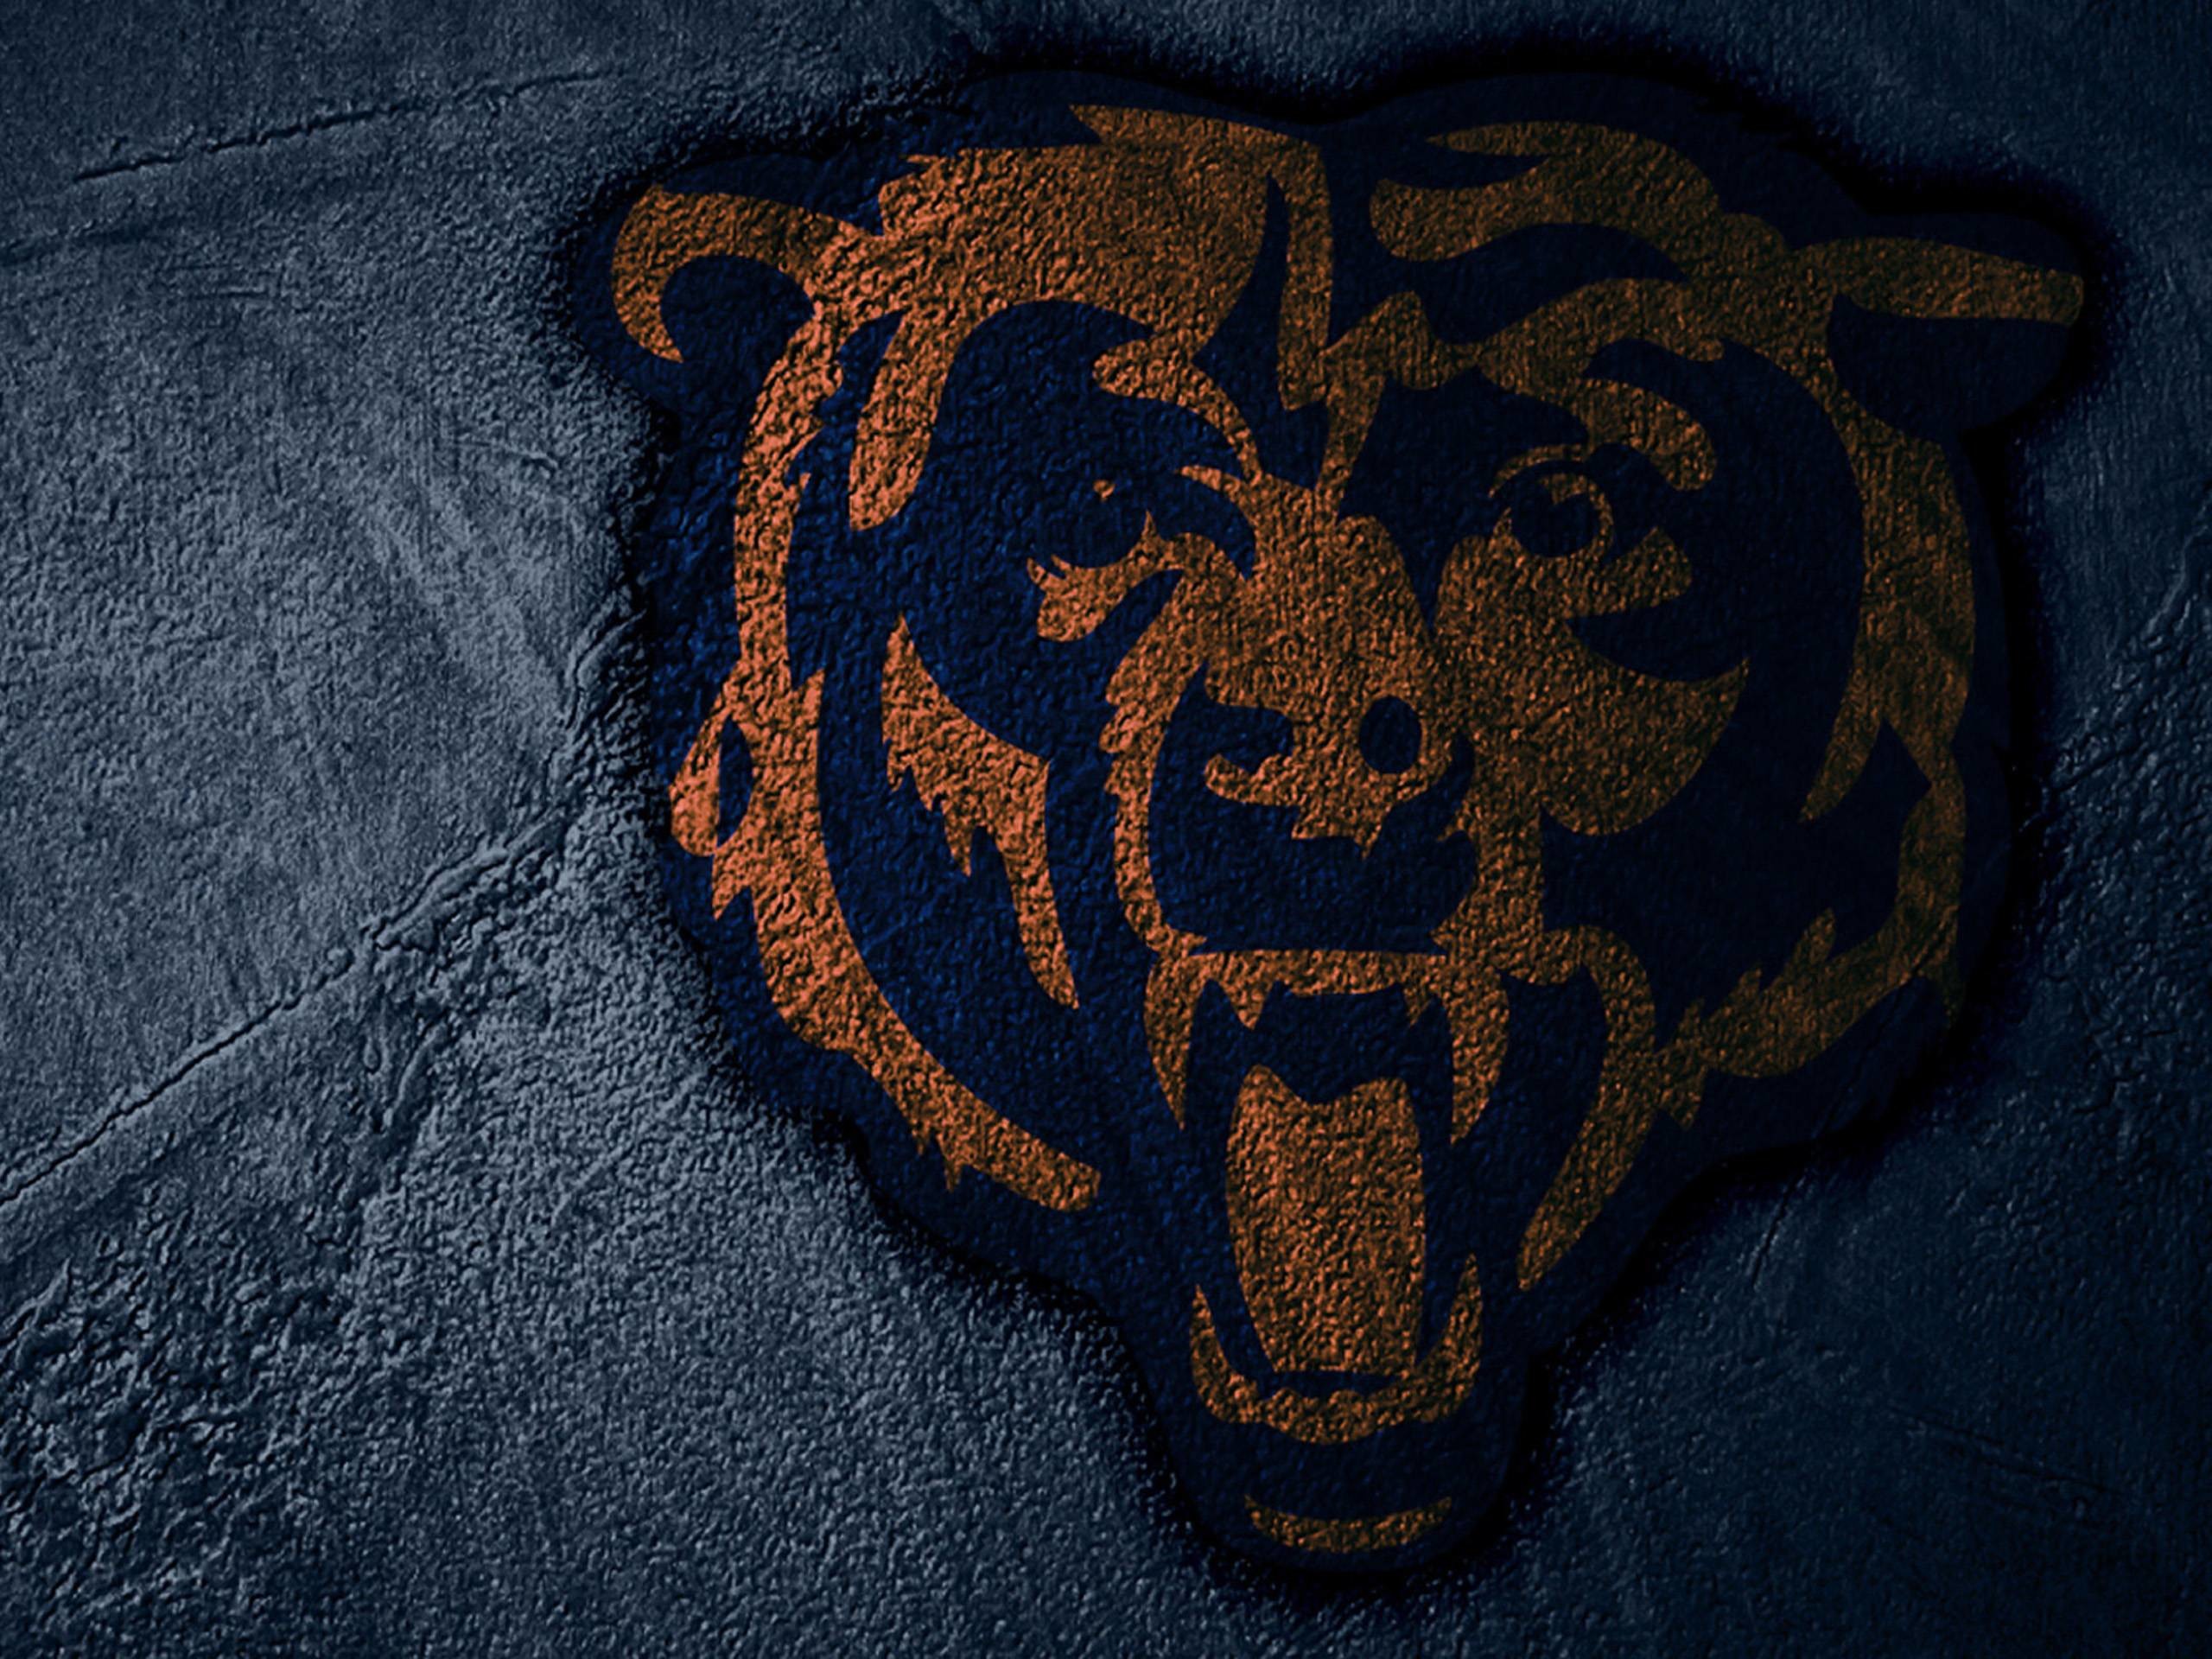 2560x1920 Chicago Bears NFL Wallpaper 52571 High Resolution | download all .